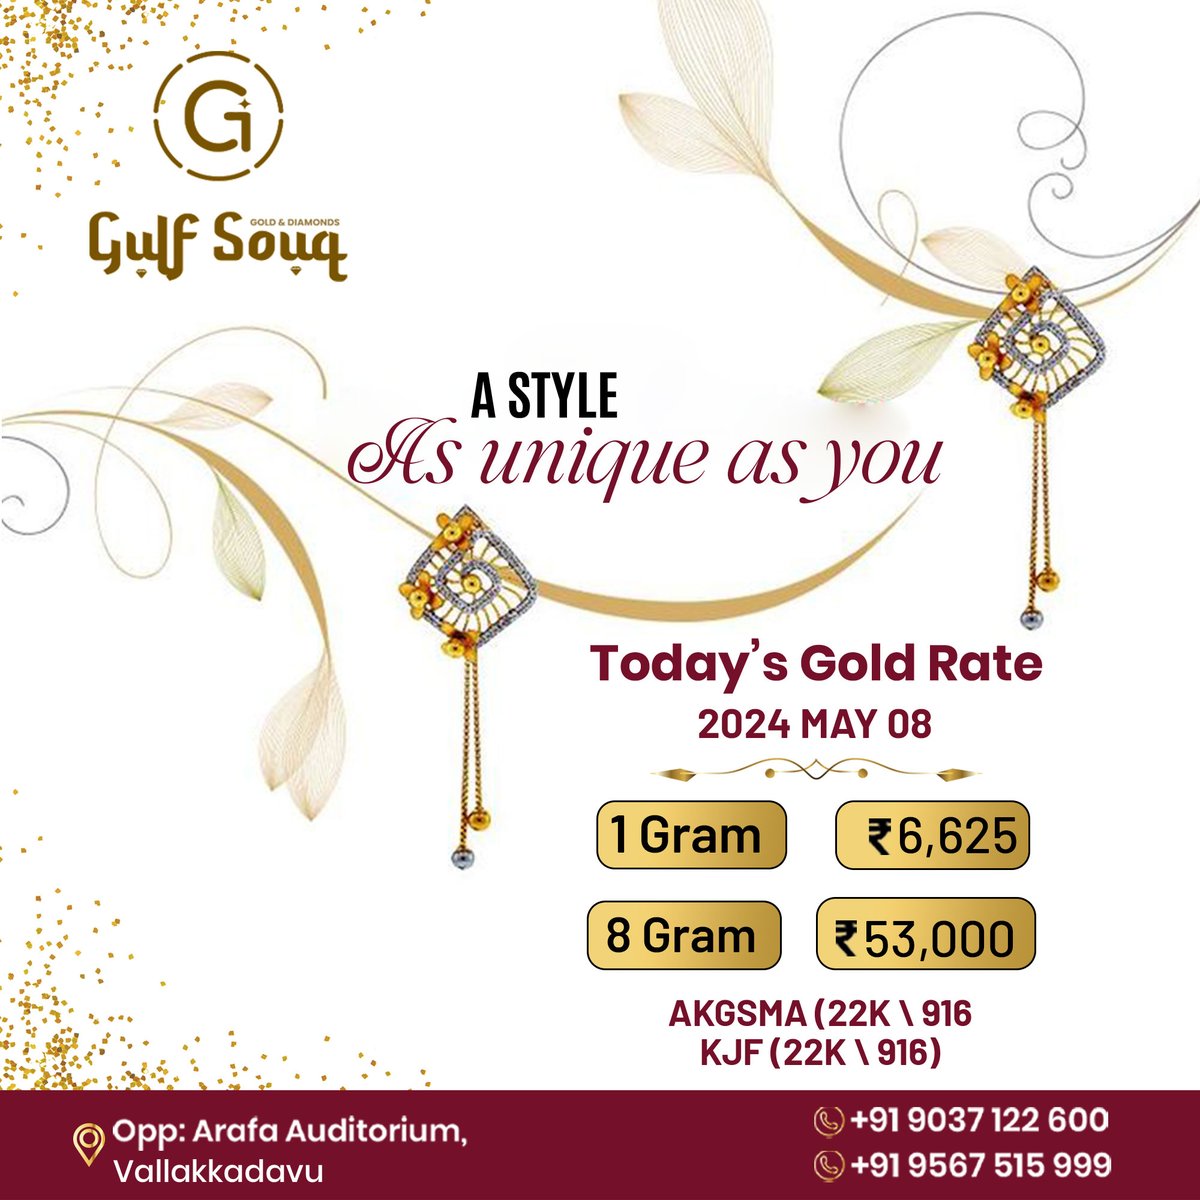 Experience the essence of tradition and culture at Gulf Souq👑✨
⭐️Today's Gold Rate:
1 Gram: 6,625/-
8 Gram: 53,000/-
#JewelryLove #AccessorizeInStyle #SparkleAndShine #GlamorousGems #JewelryObsessed #StatementJewelry #LuxuryLifestyle #BlingBling #FashionAccessories